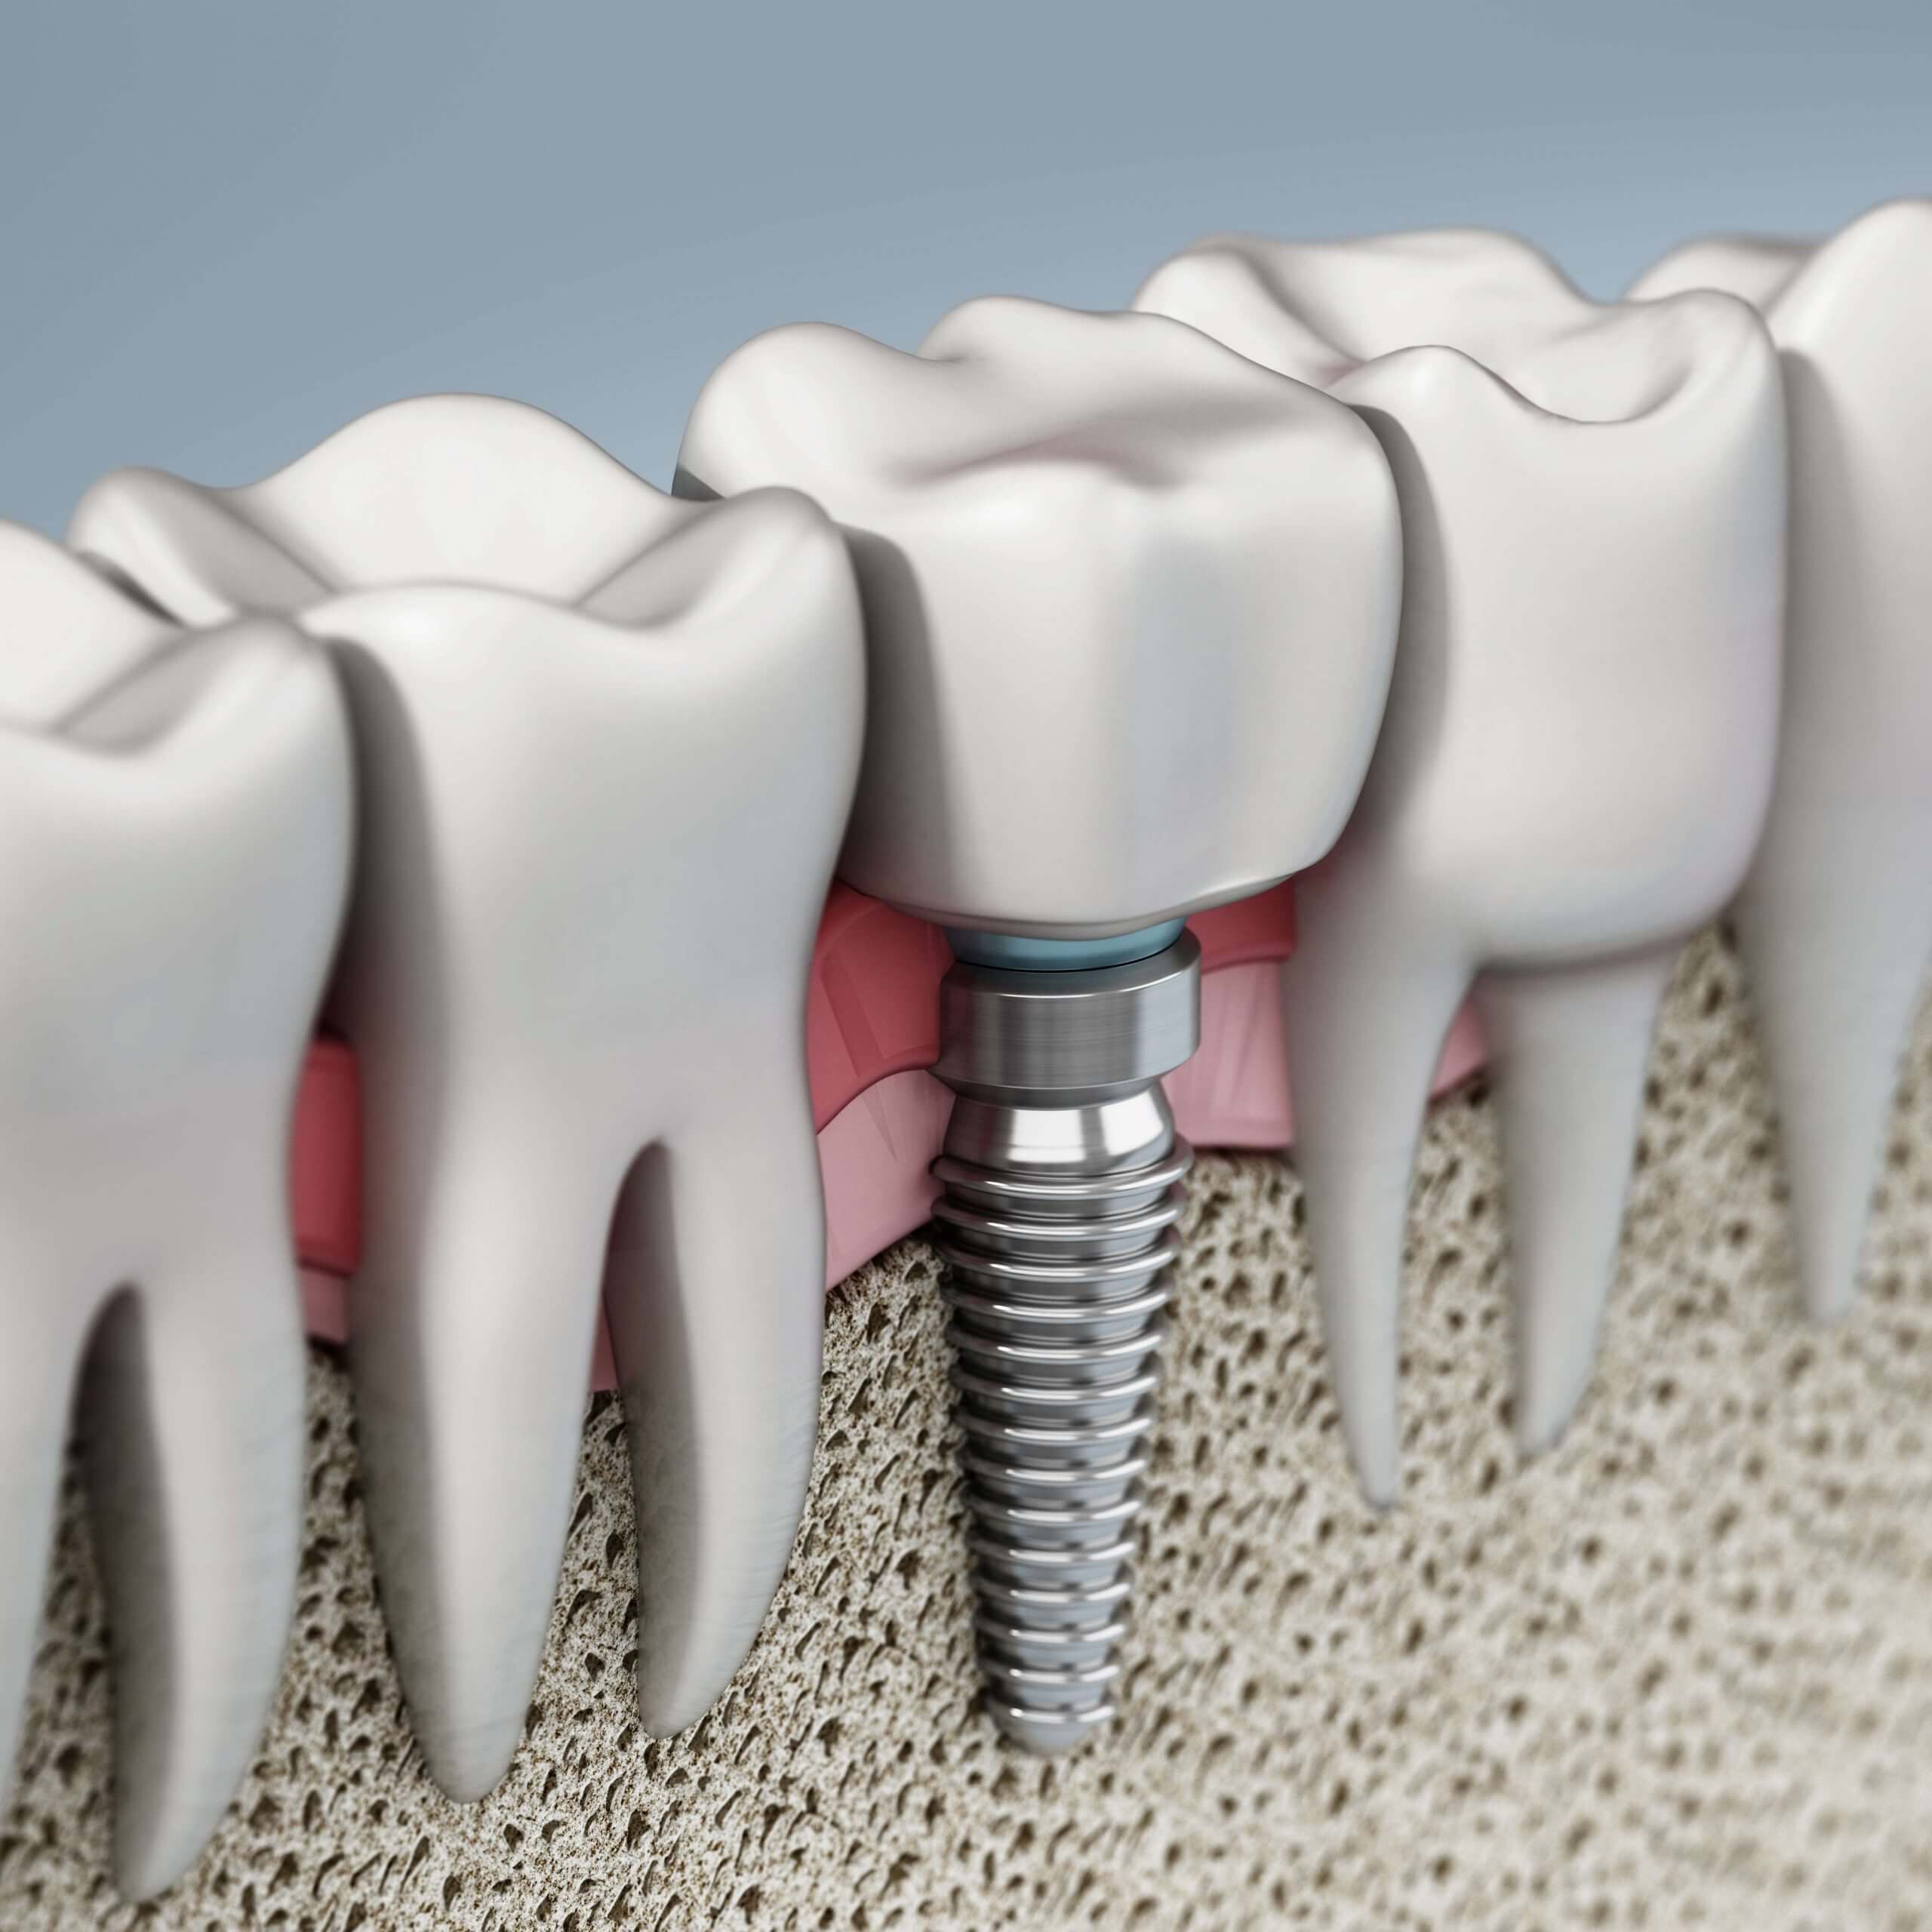 graphic illustration art showing a dental implant beside natural teeth and how the screw like part of the implant is placed in the bone of the mouth.